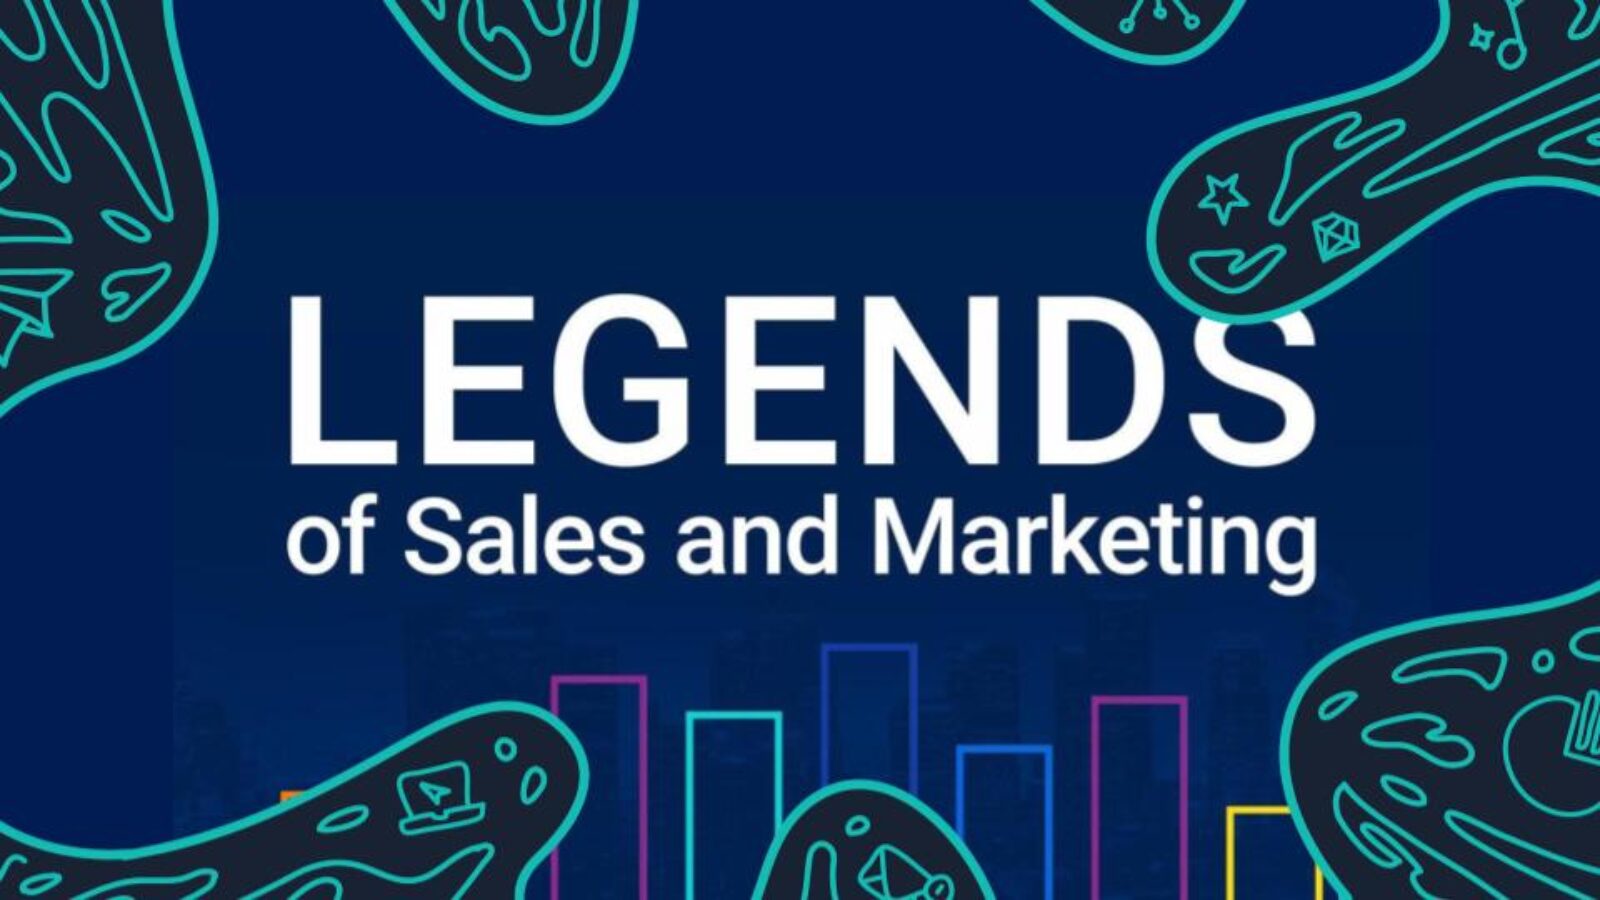 6sense CMO Latané Conant Joins ‘Legends of Sales and Marketing’ Podcast